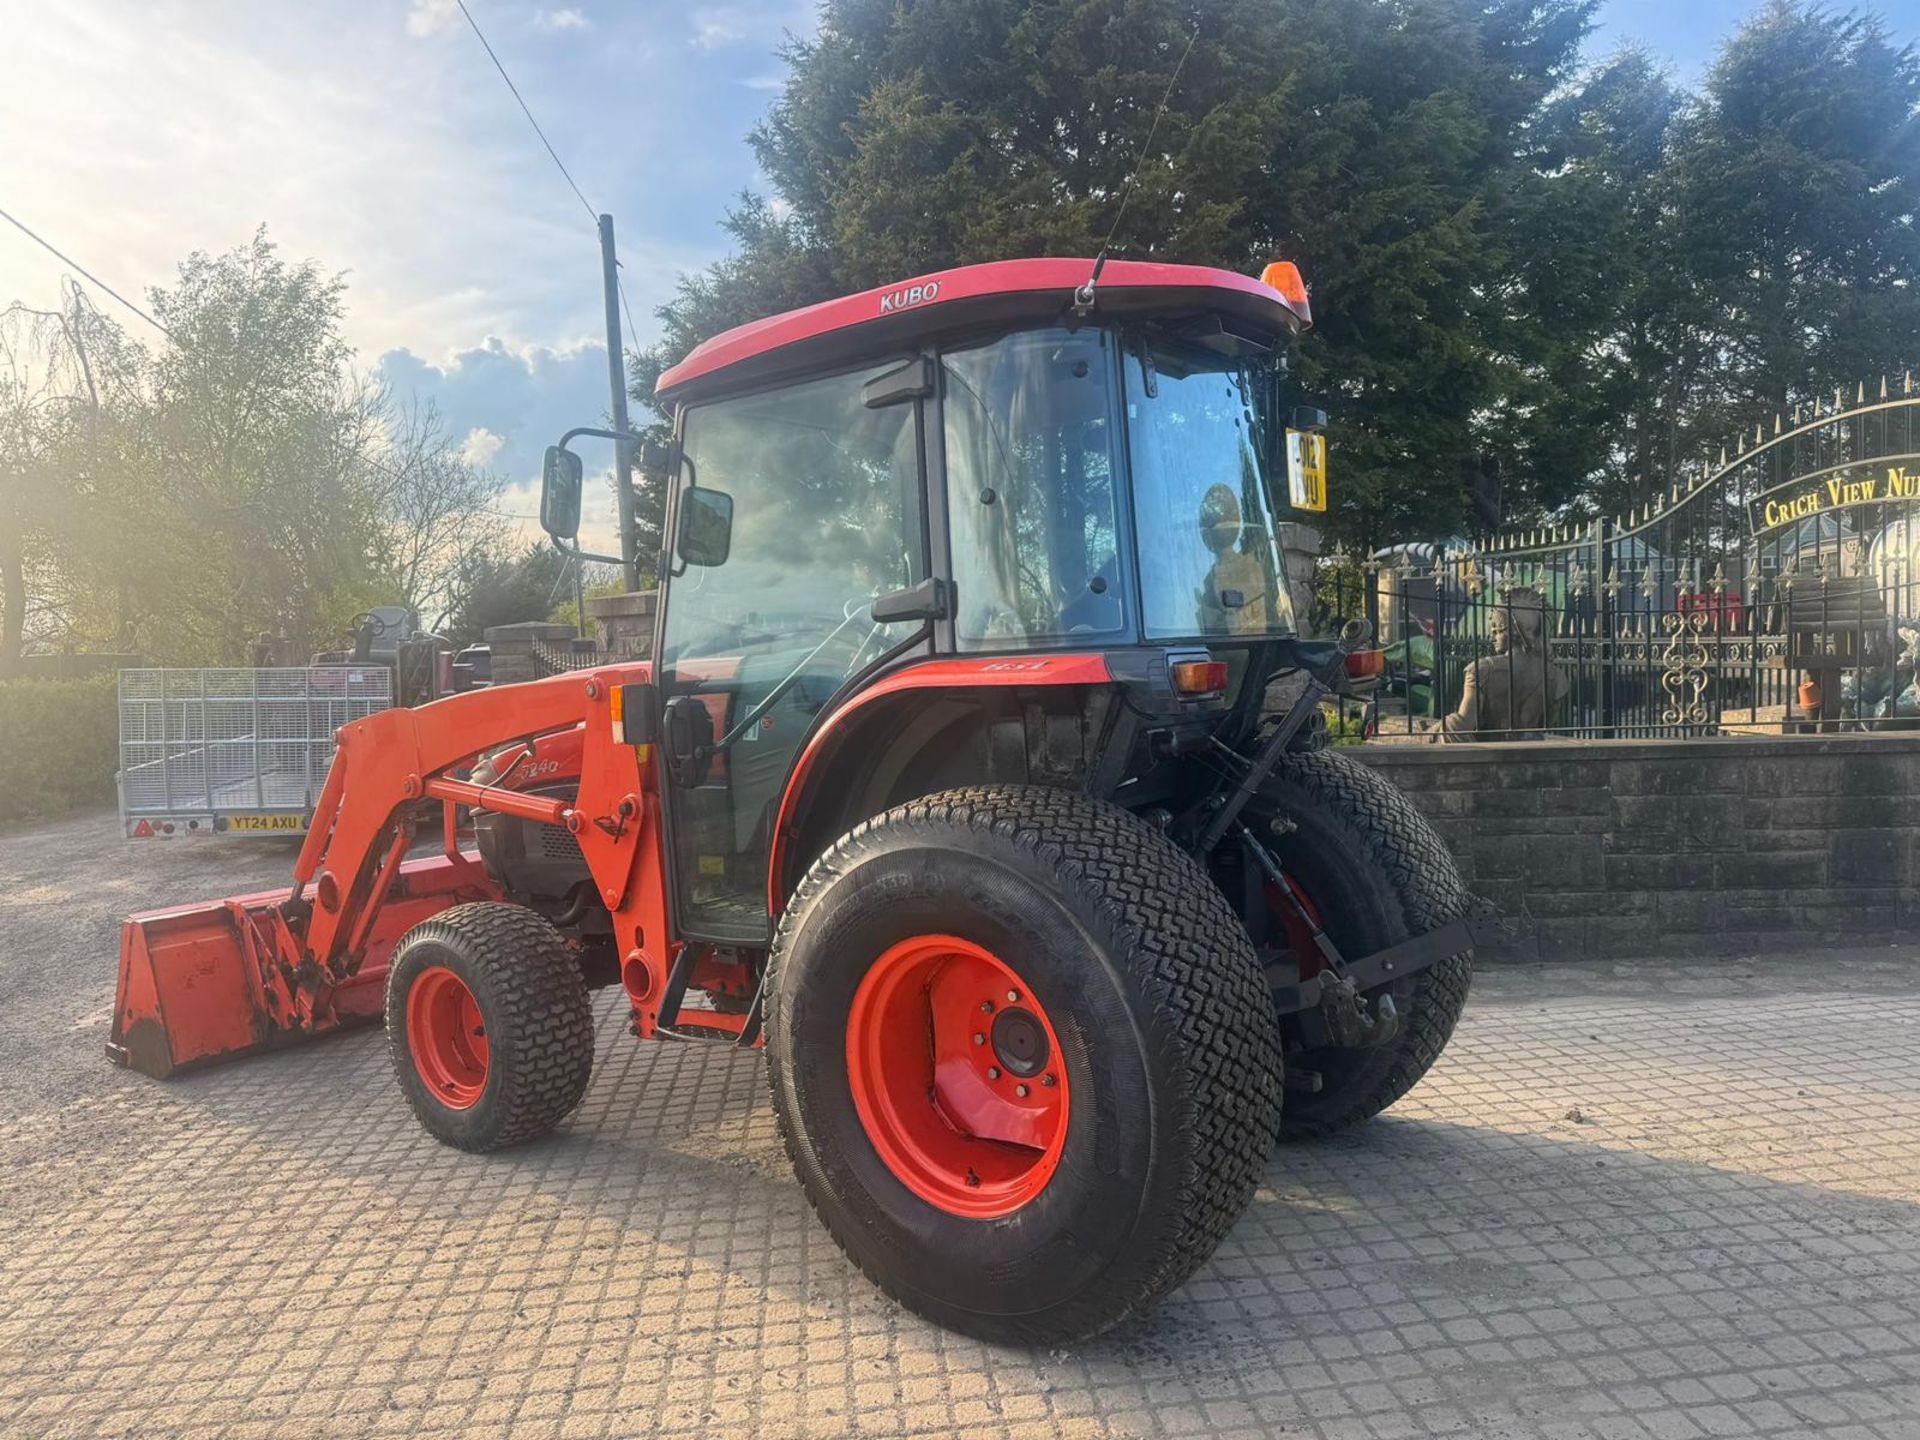 2012 KUBOTA L5240HST 54HP 4WD COMPACT TRACTOR WITH FRONT LOADER AND BUCKET *PLUS VAT* - Image 2 of 13